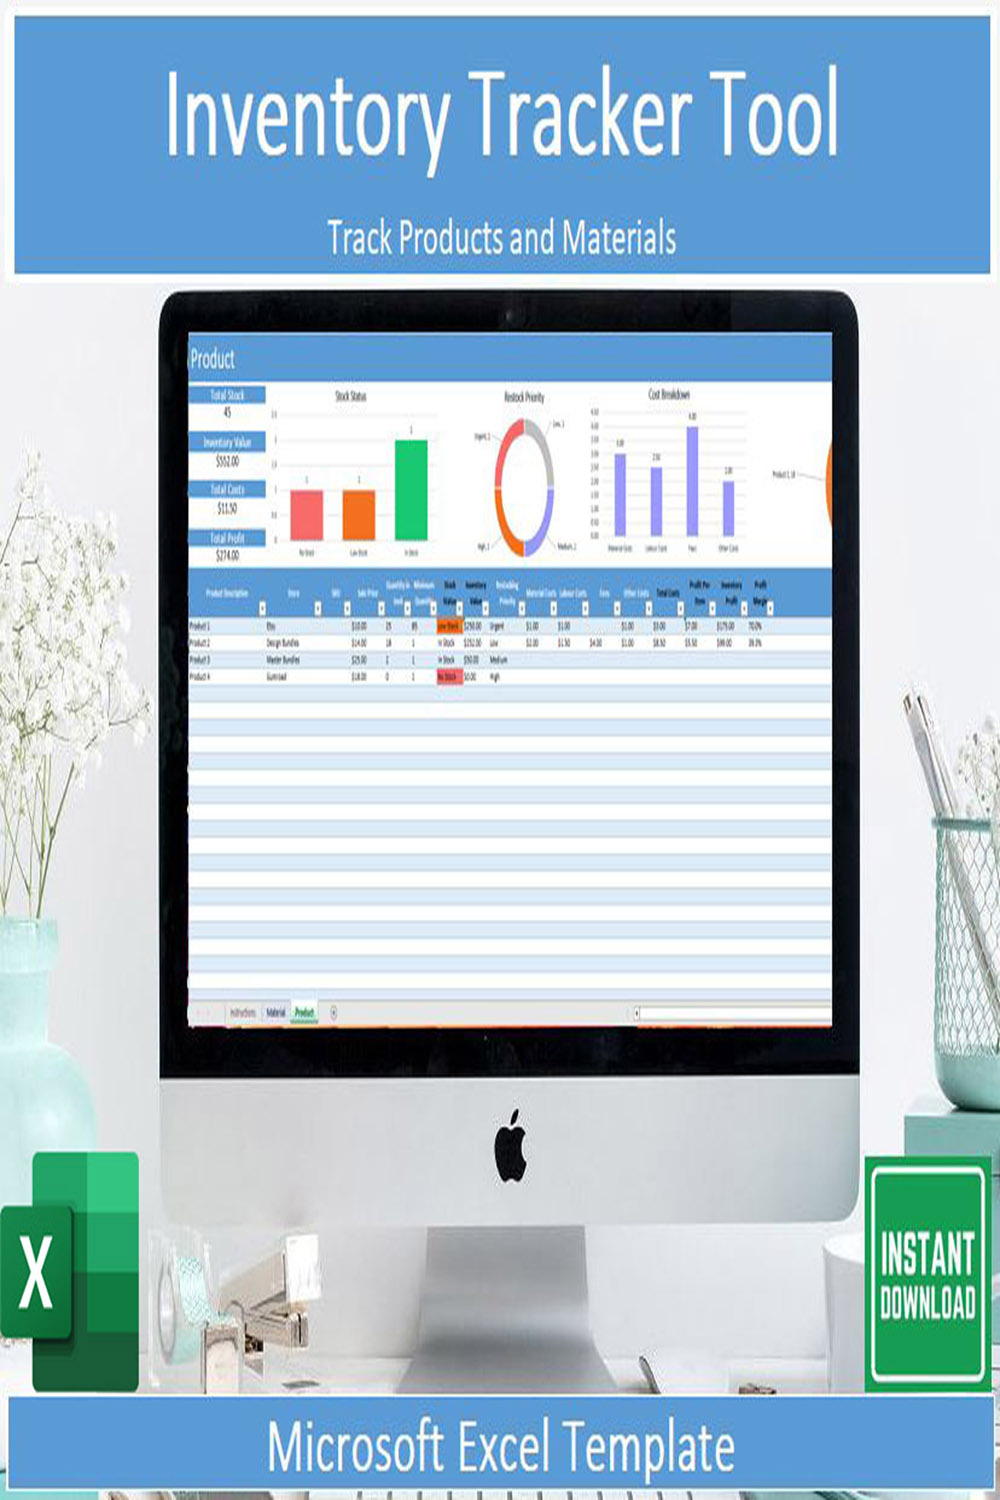 Inventory Tracker, Inventory Management Spreadsheet, Microsoft Excel, Inventory Template, Business Tracker, Material & Product Inventory pinterest preview image.